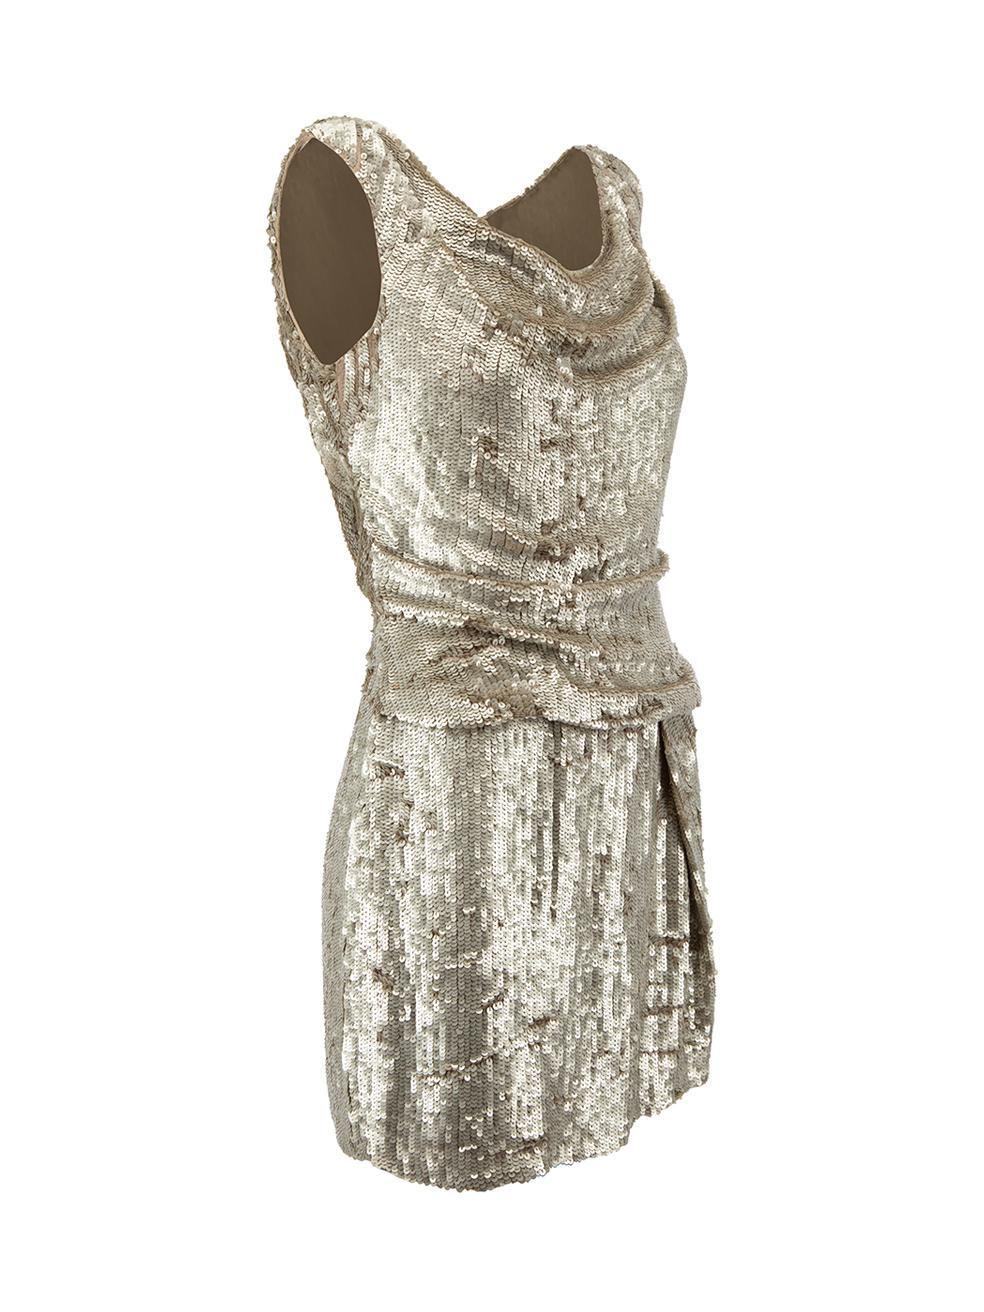 CONDITION is Very good. Minimal wear to dress is evident. Minimal wear to the right underarm and the hem with missing sequins on this used Parker designer resale item. 
  
  Details
  Metallic beige
  Silk
  Mini dress
  Sequinned
  Draped and